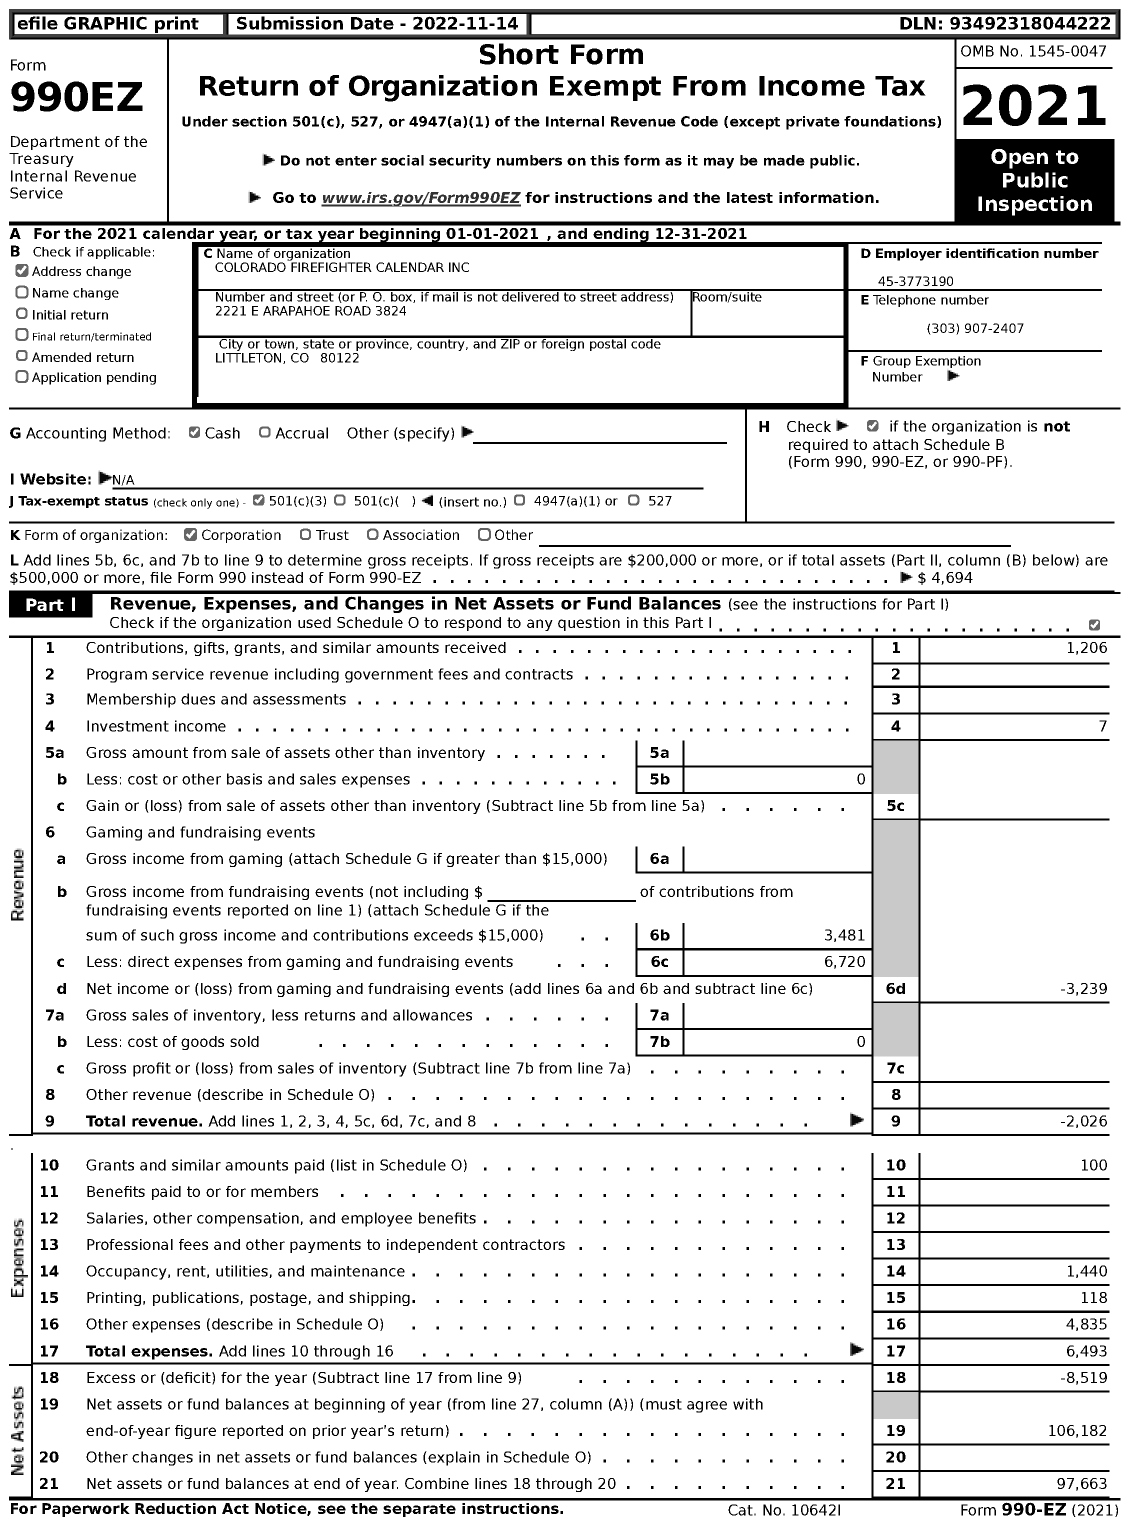 Image of first page of 2021 Form 990EZ for Colorado Firefighter Calendar